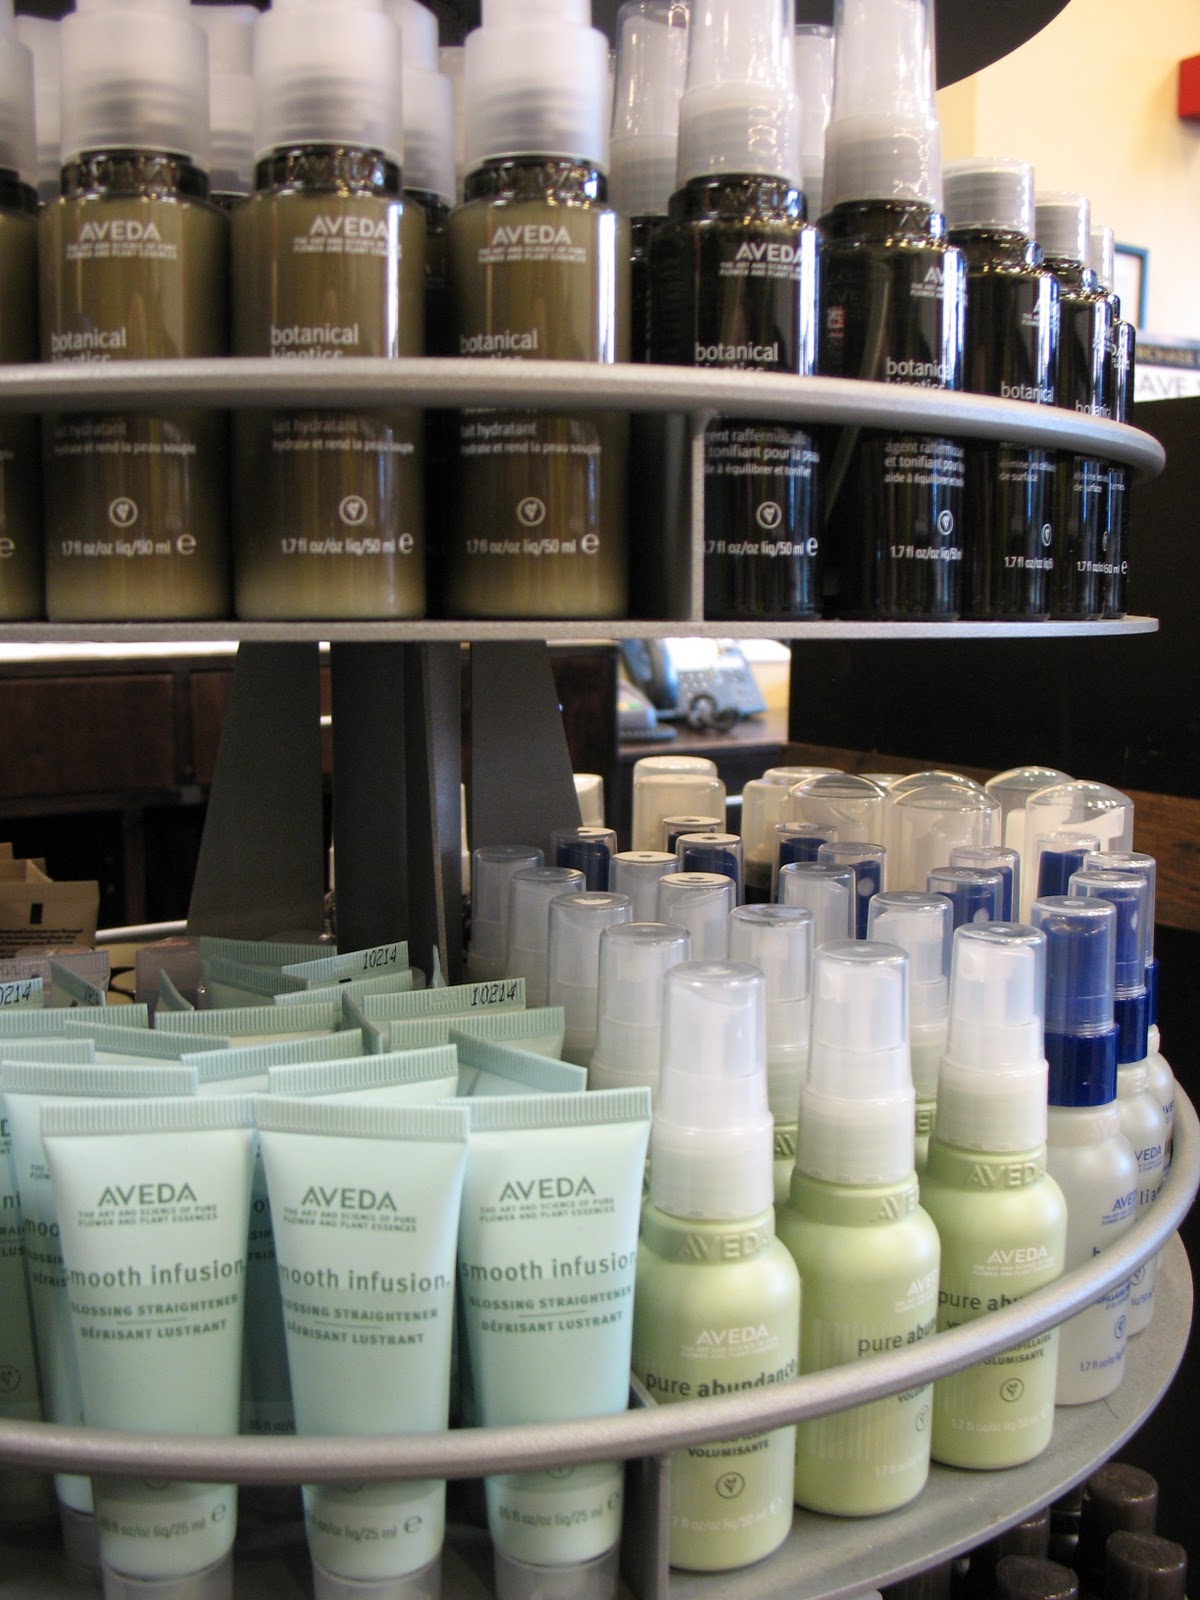 Artisan Voyage Stock Up on Travel Essentials at Aveda!